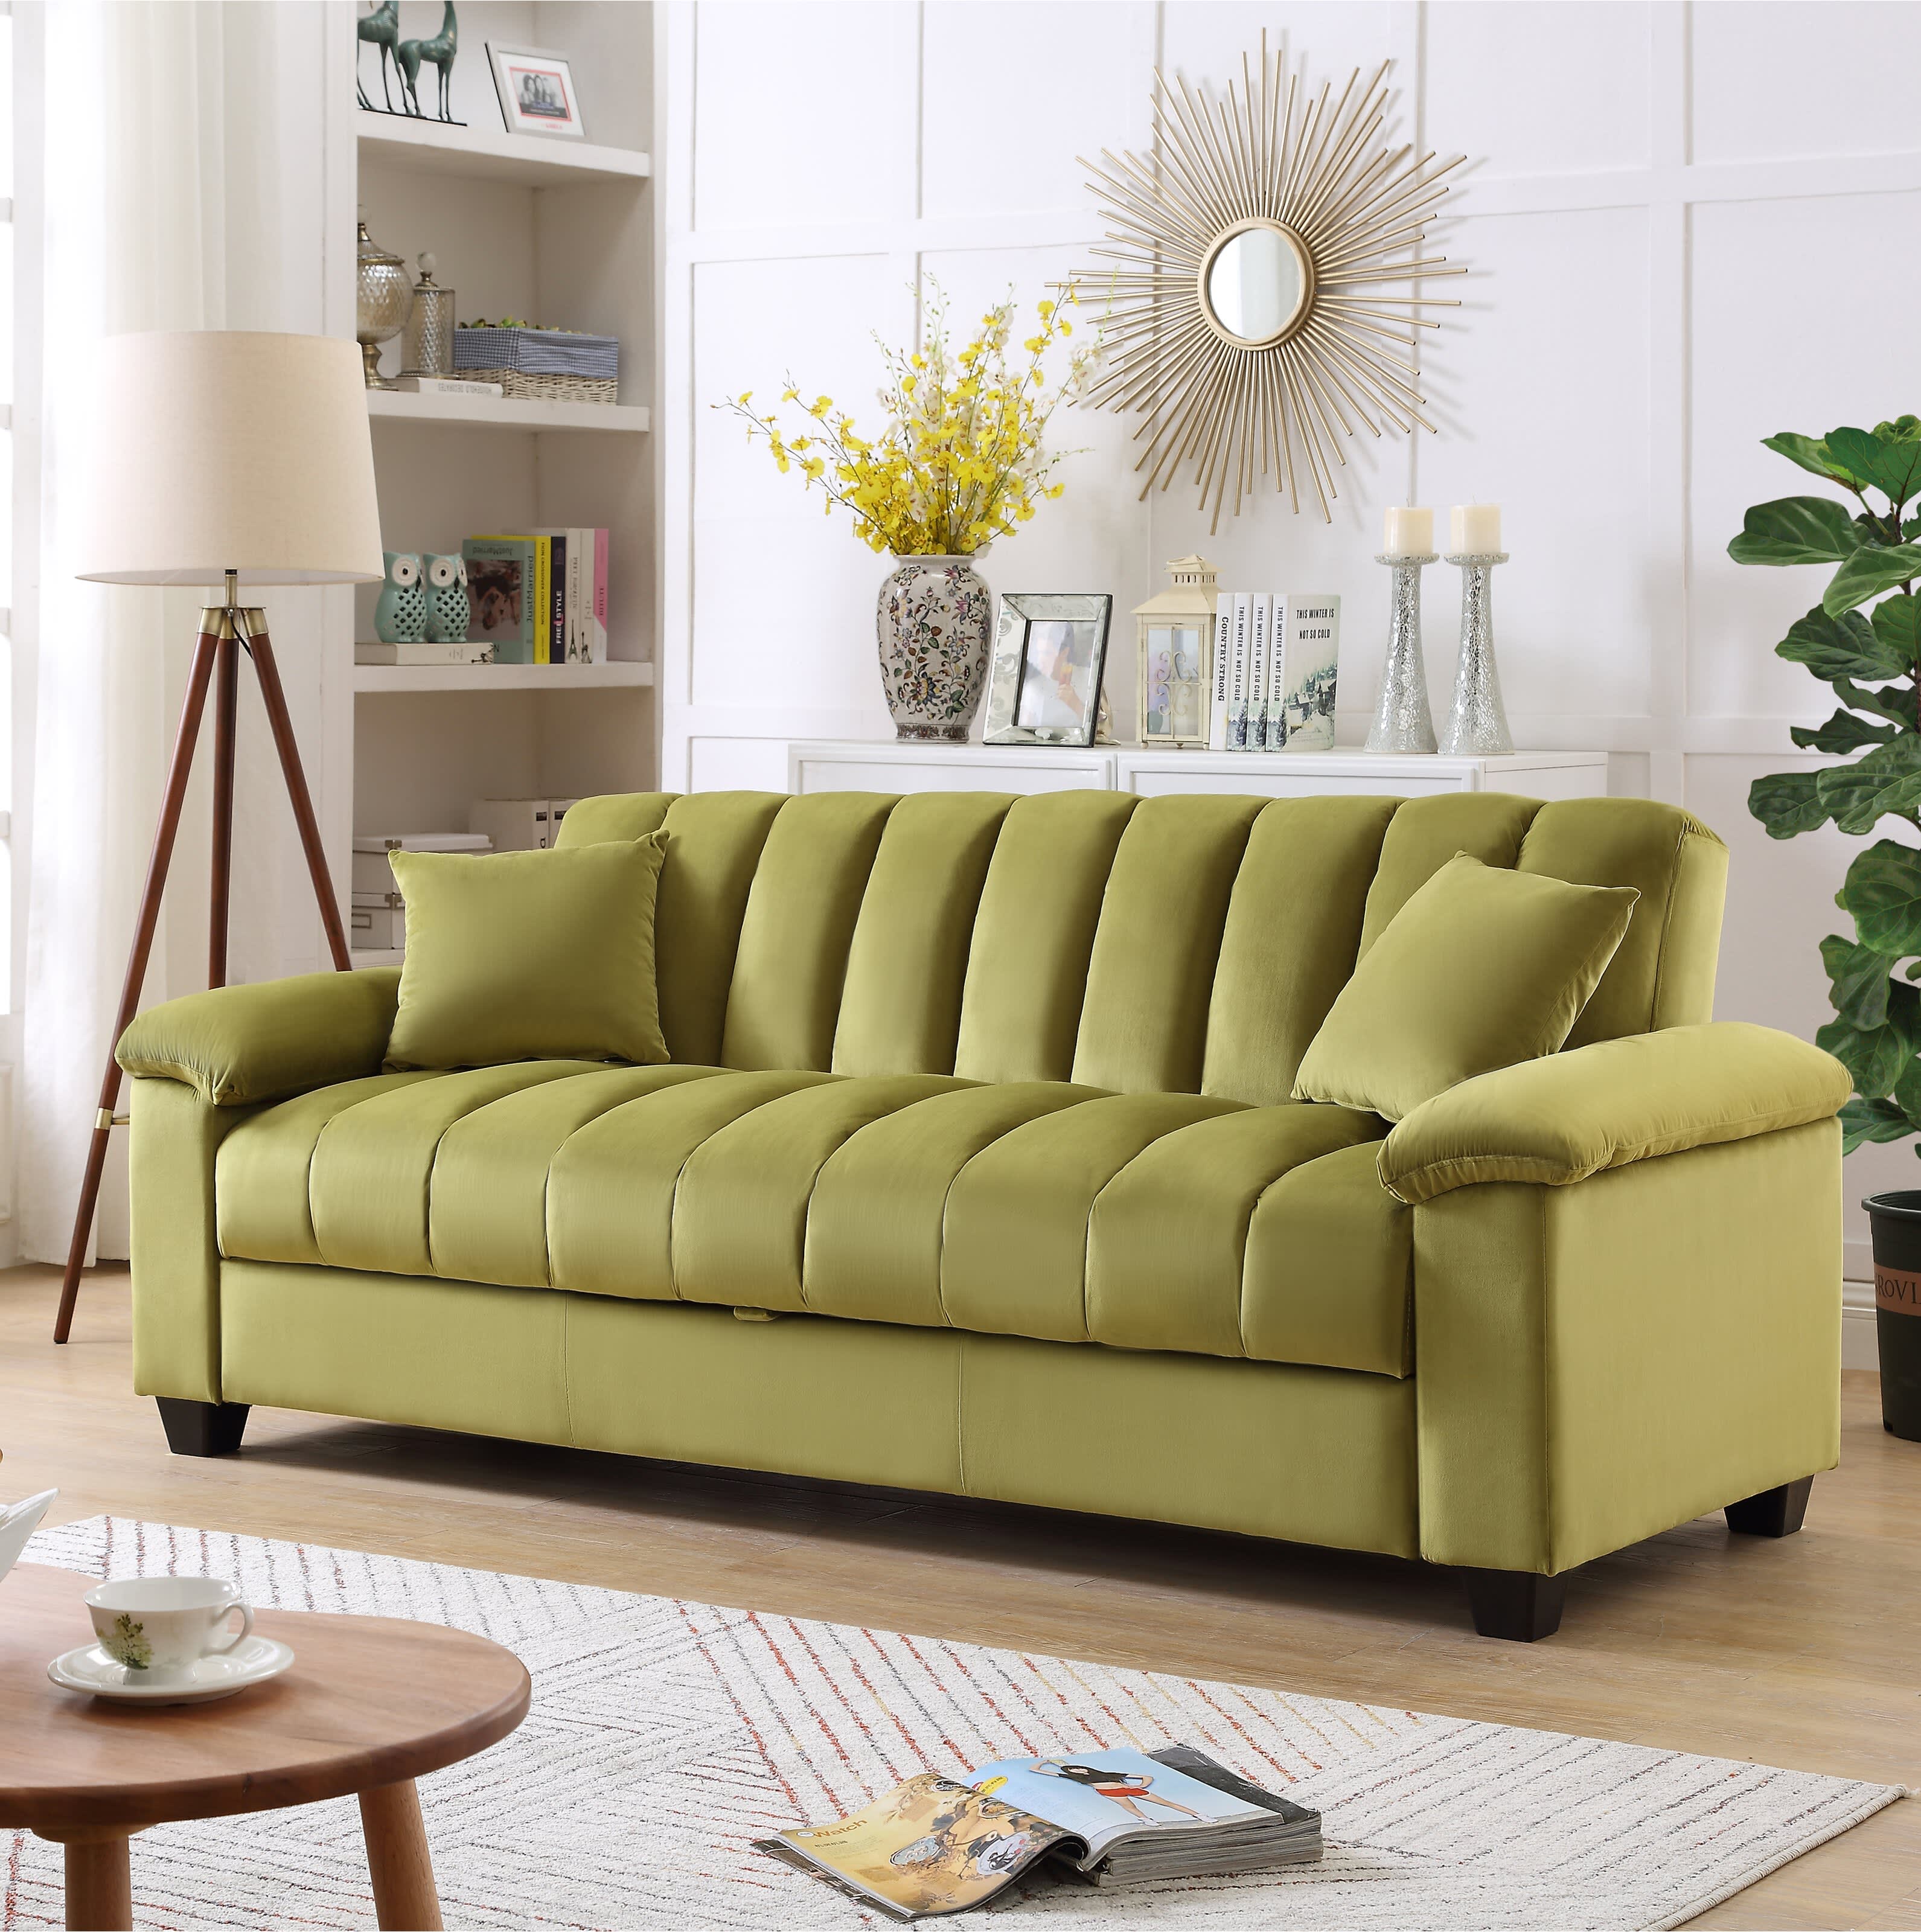 12 Best Green Sofas for 2022 - Pretty Couches for the ...